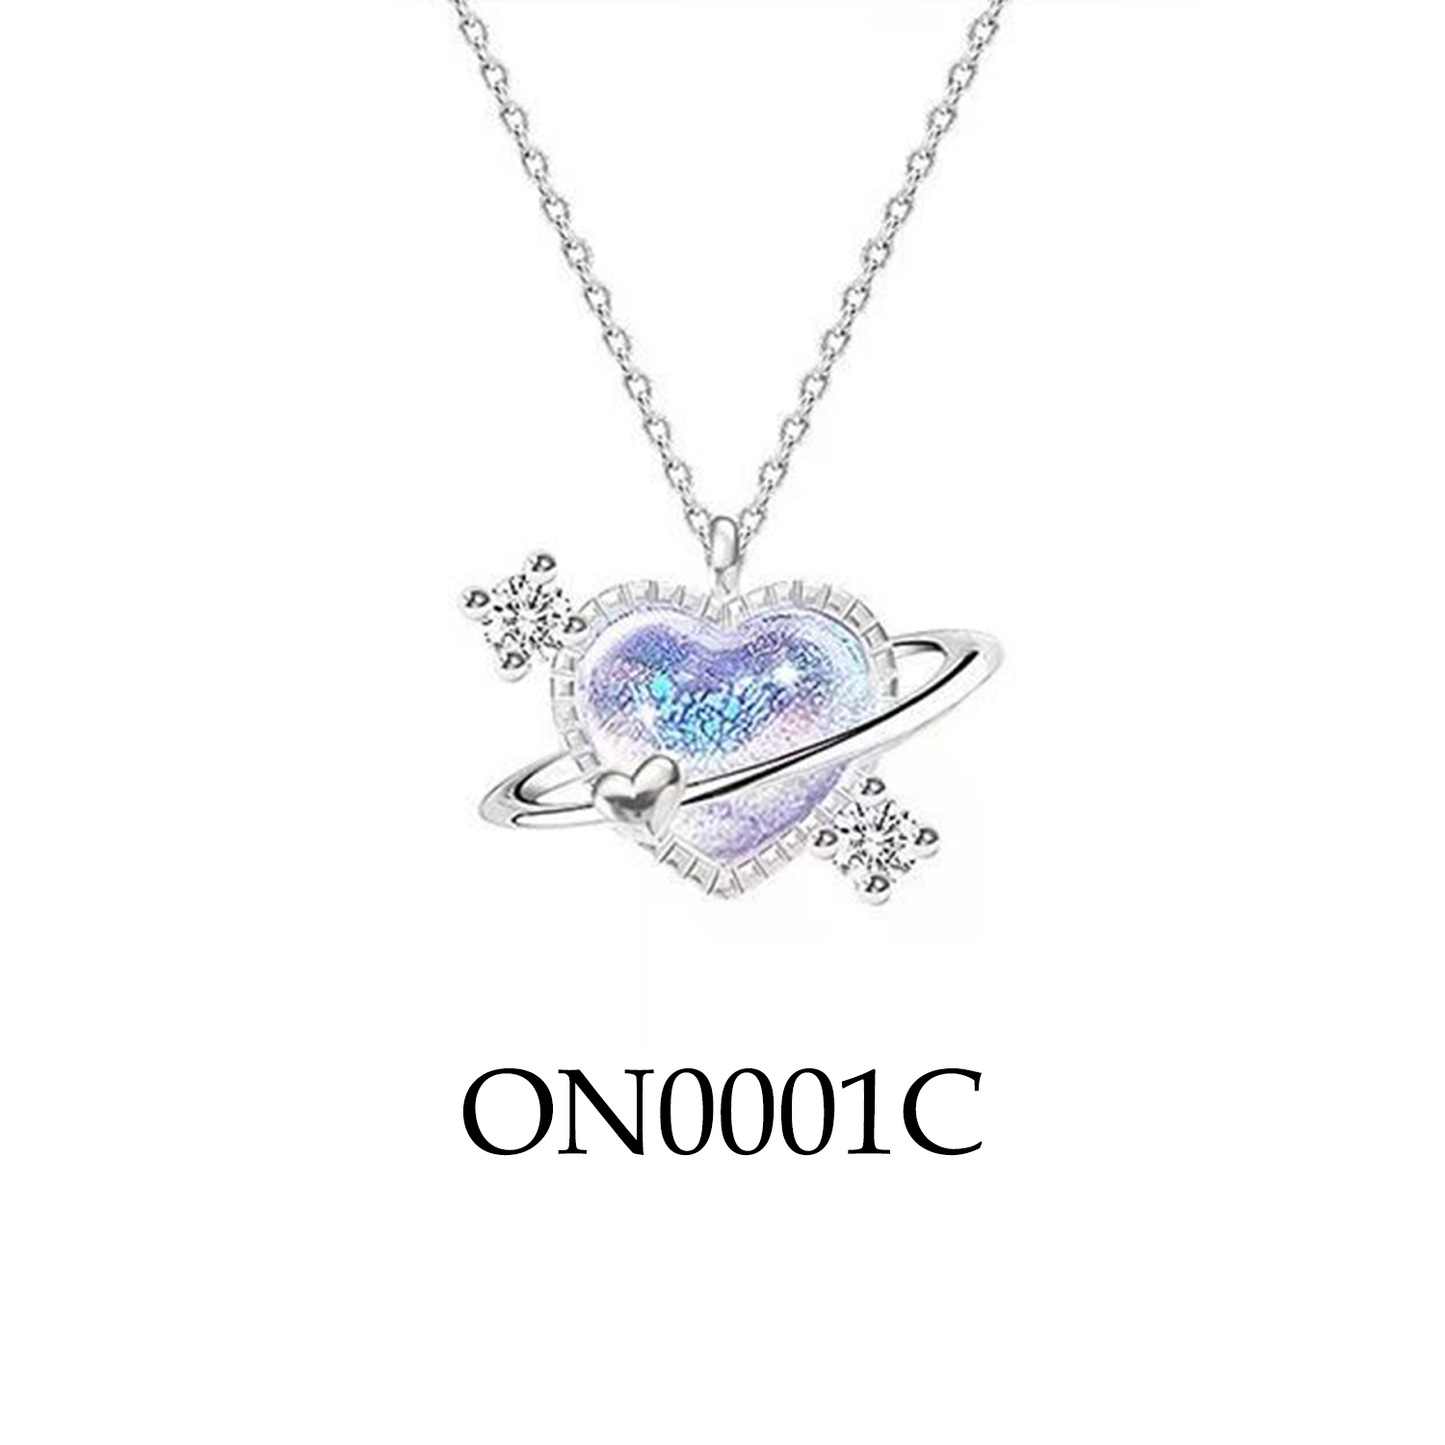 Necklace ON0001